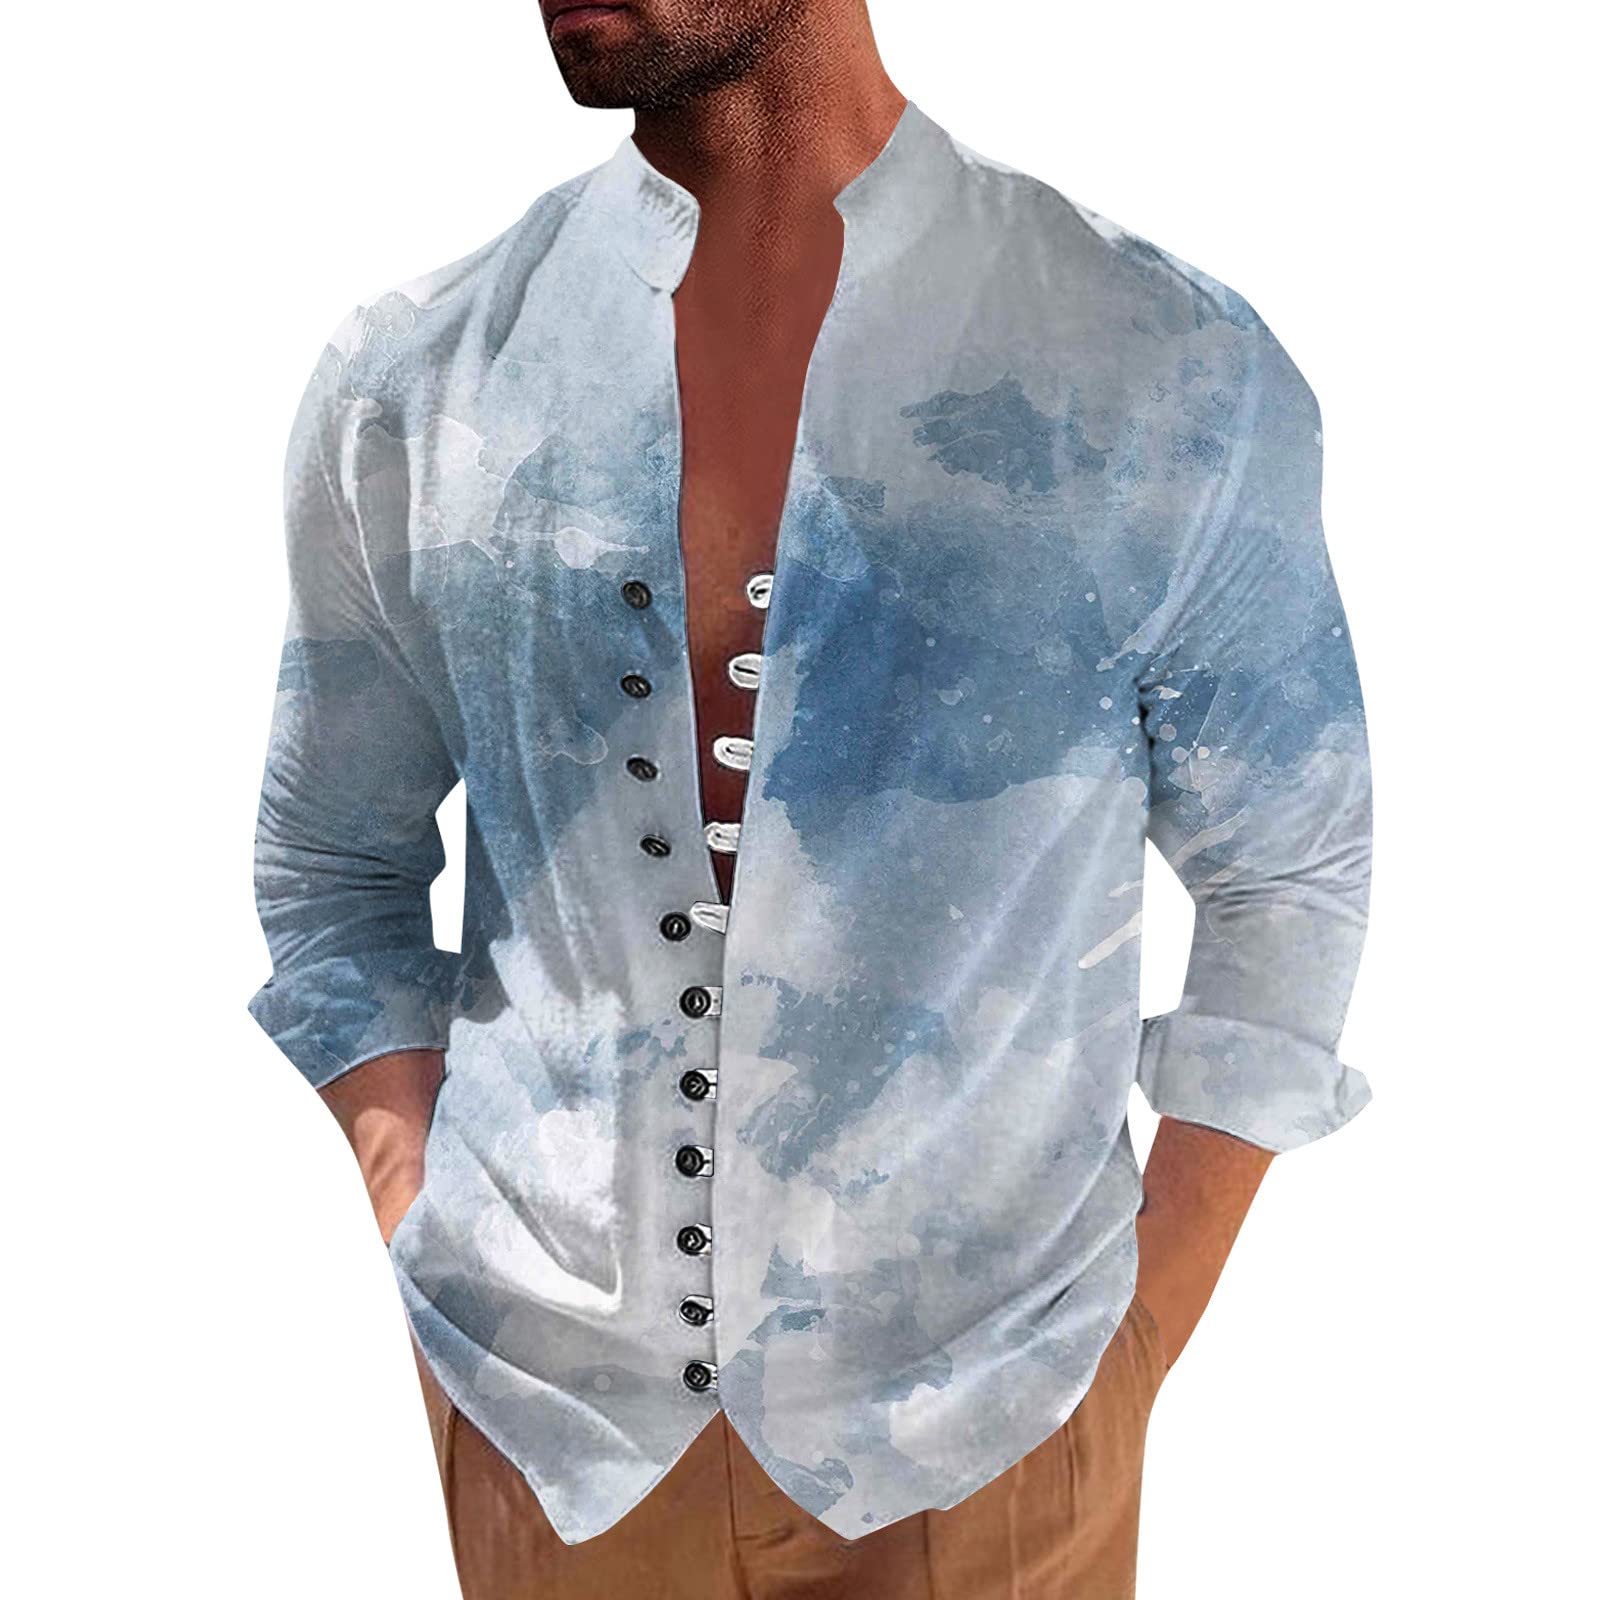 Men's Dress Shirts - Loose & Fitted